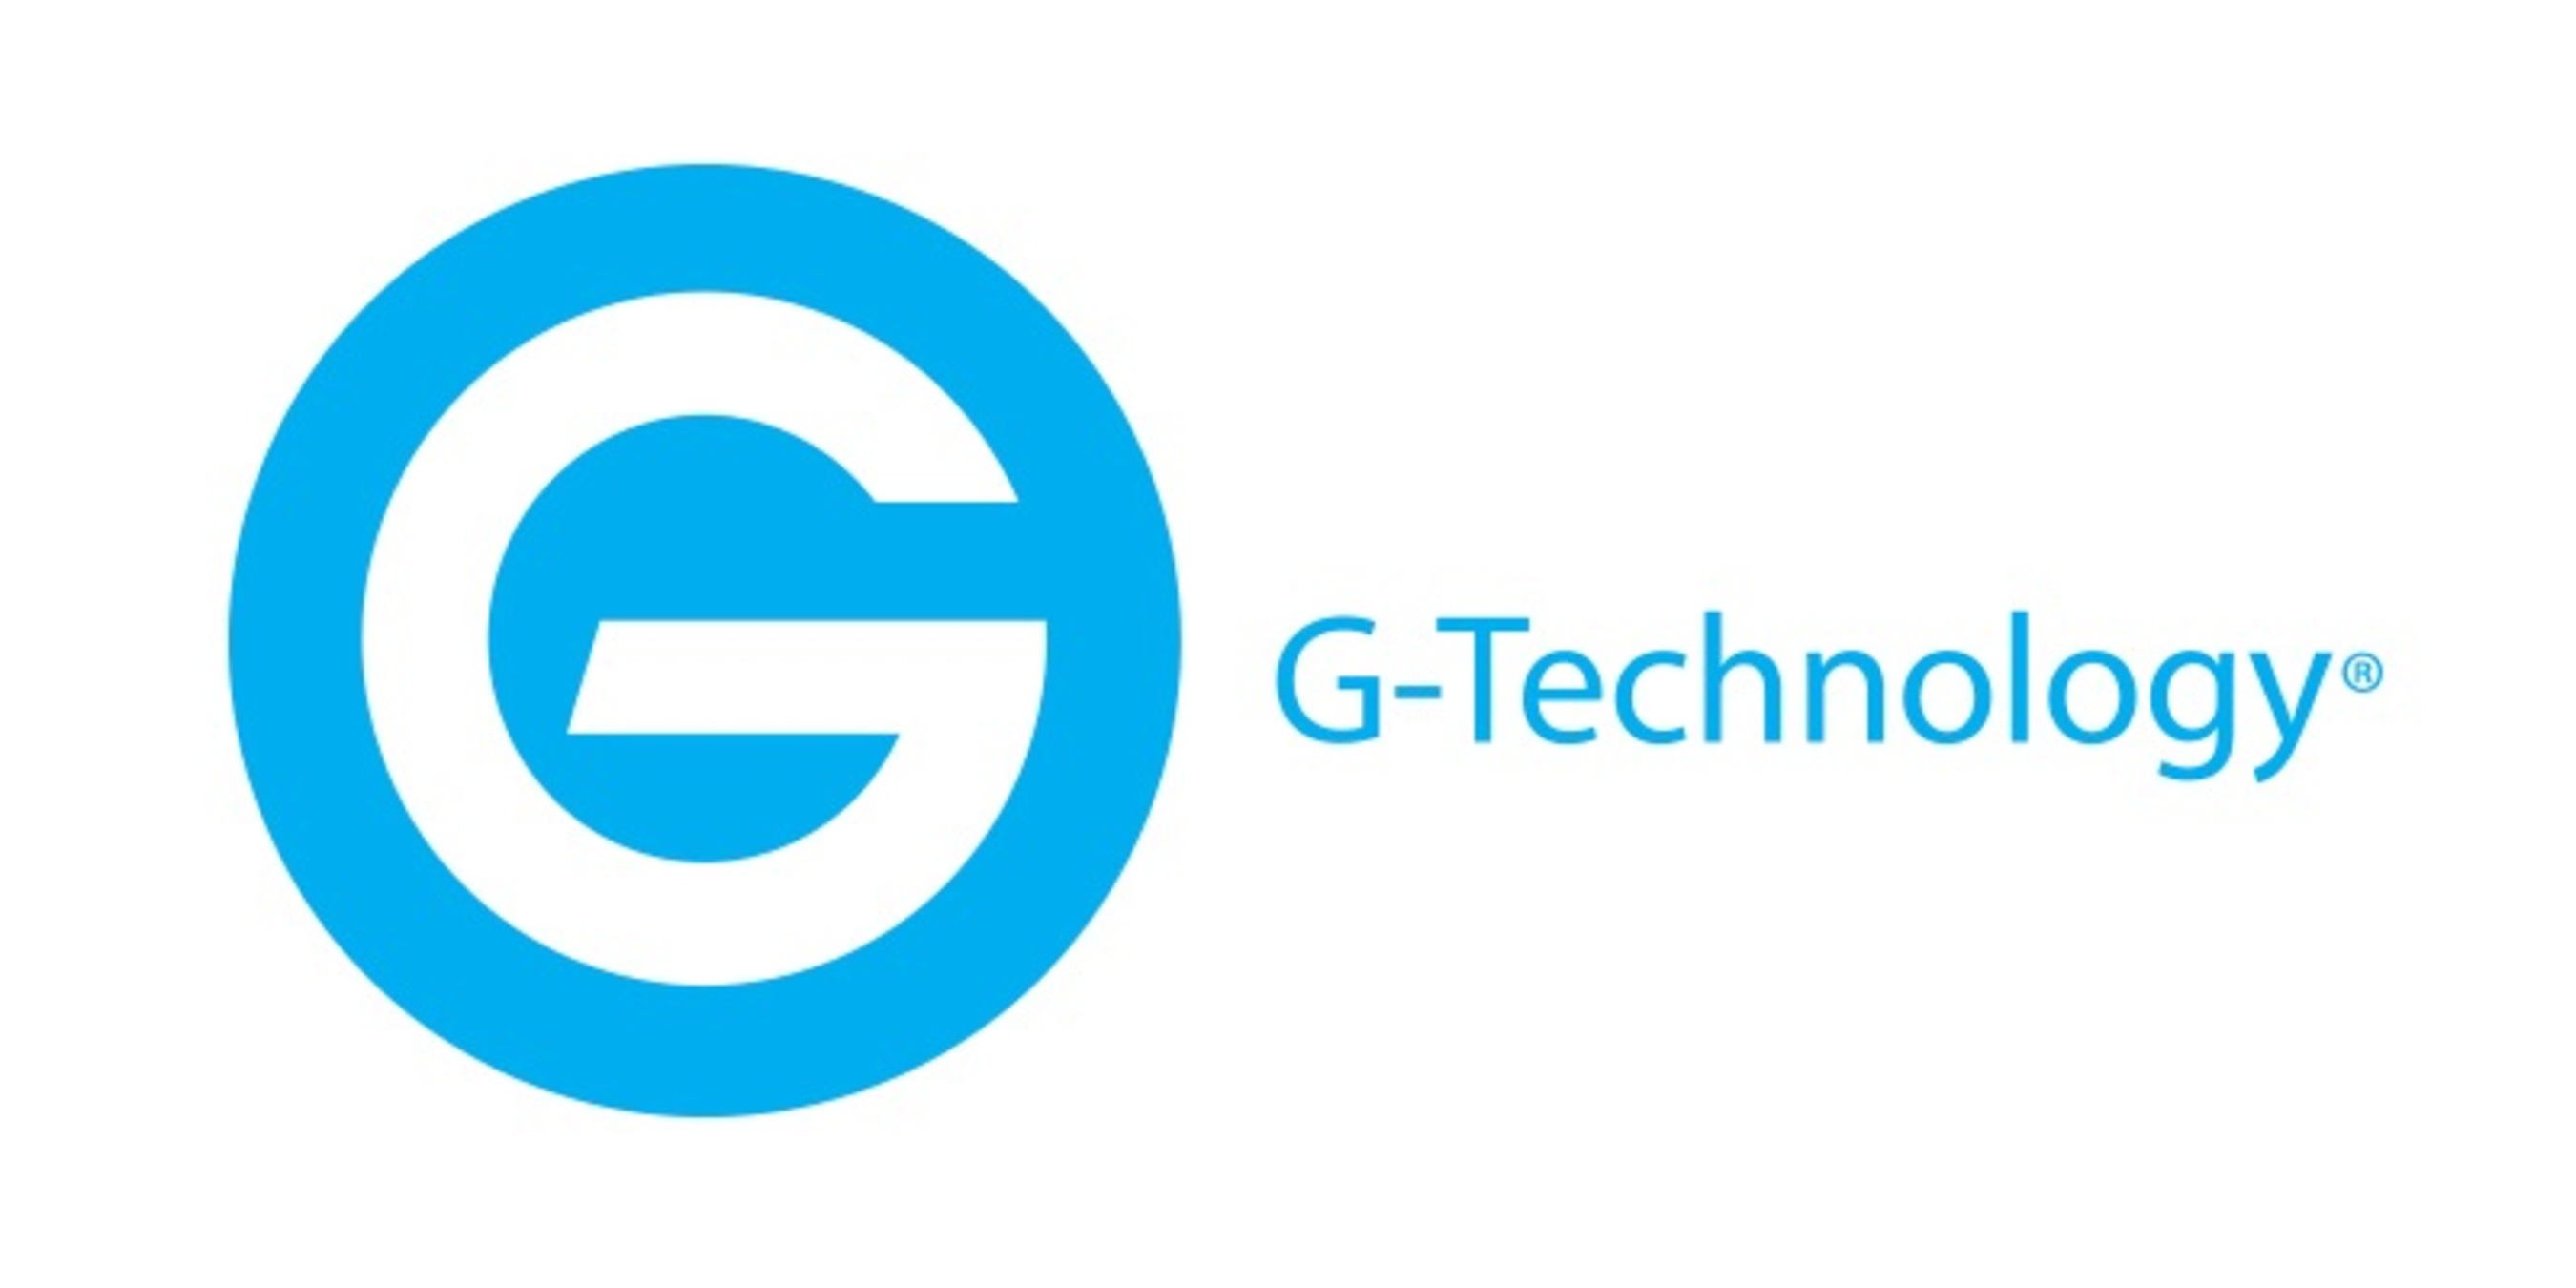 G-Technology, developers of innovative storage solutions for those looking to push creativity beyond the limits